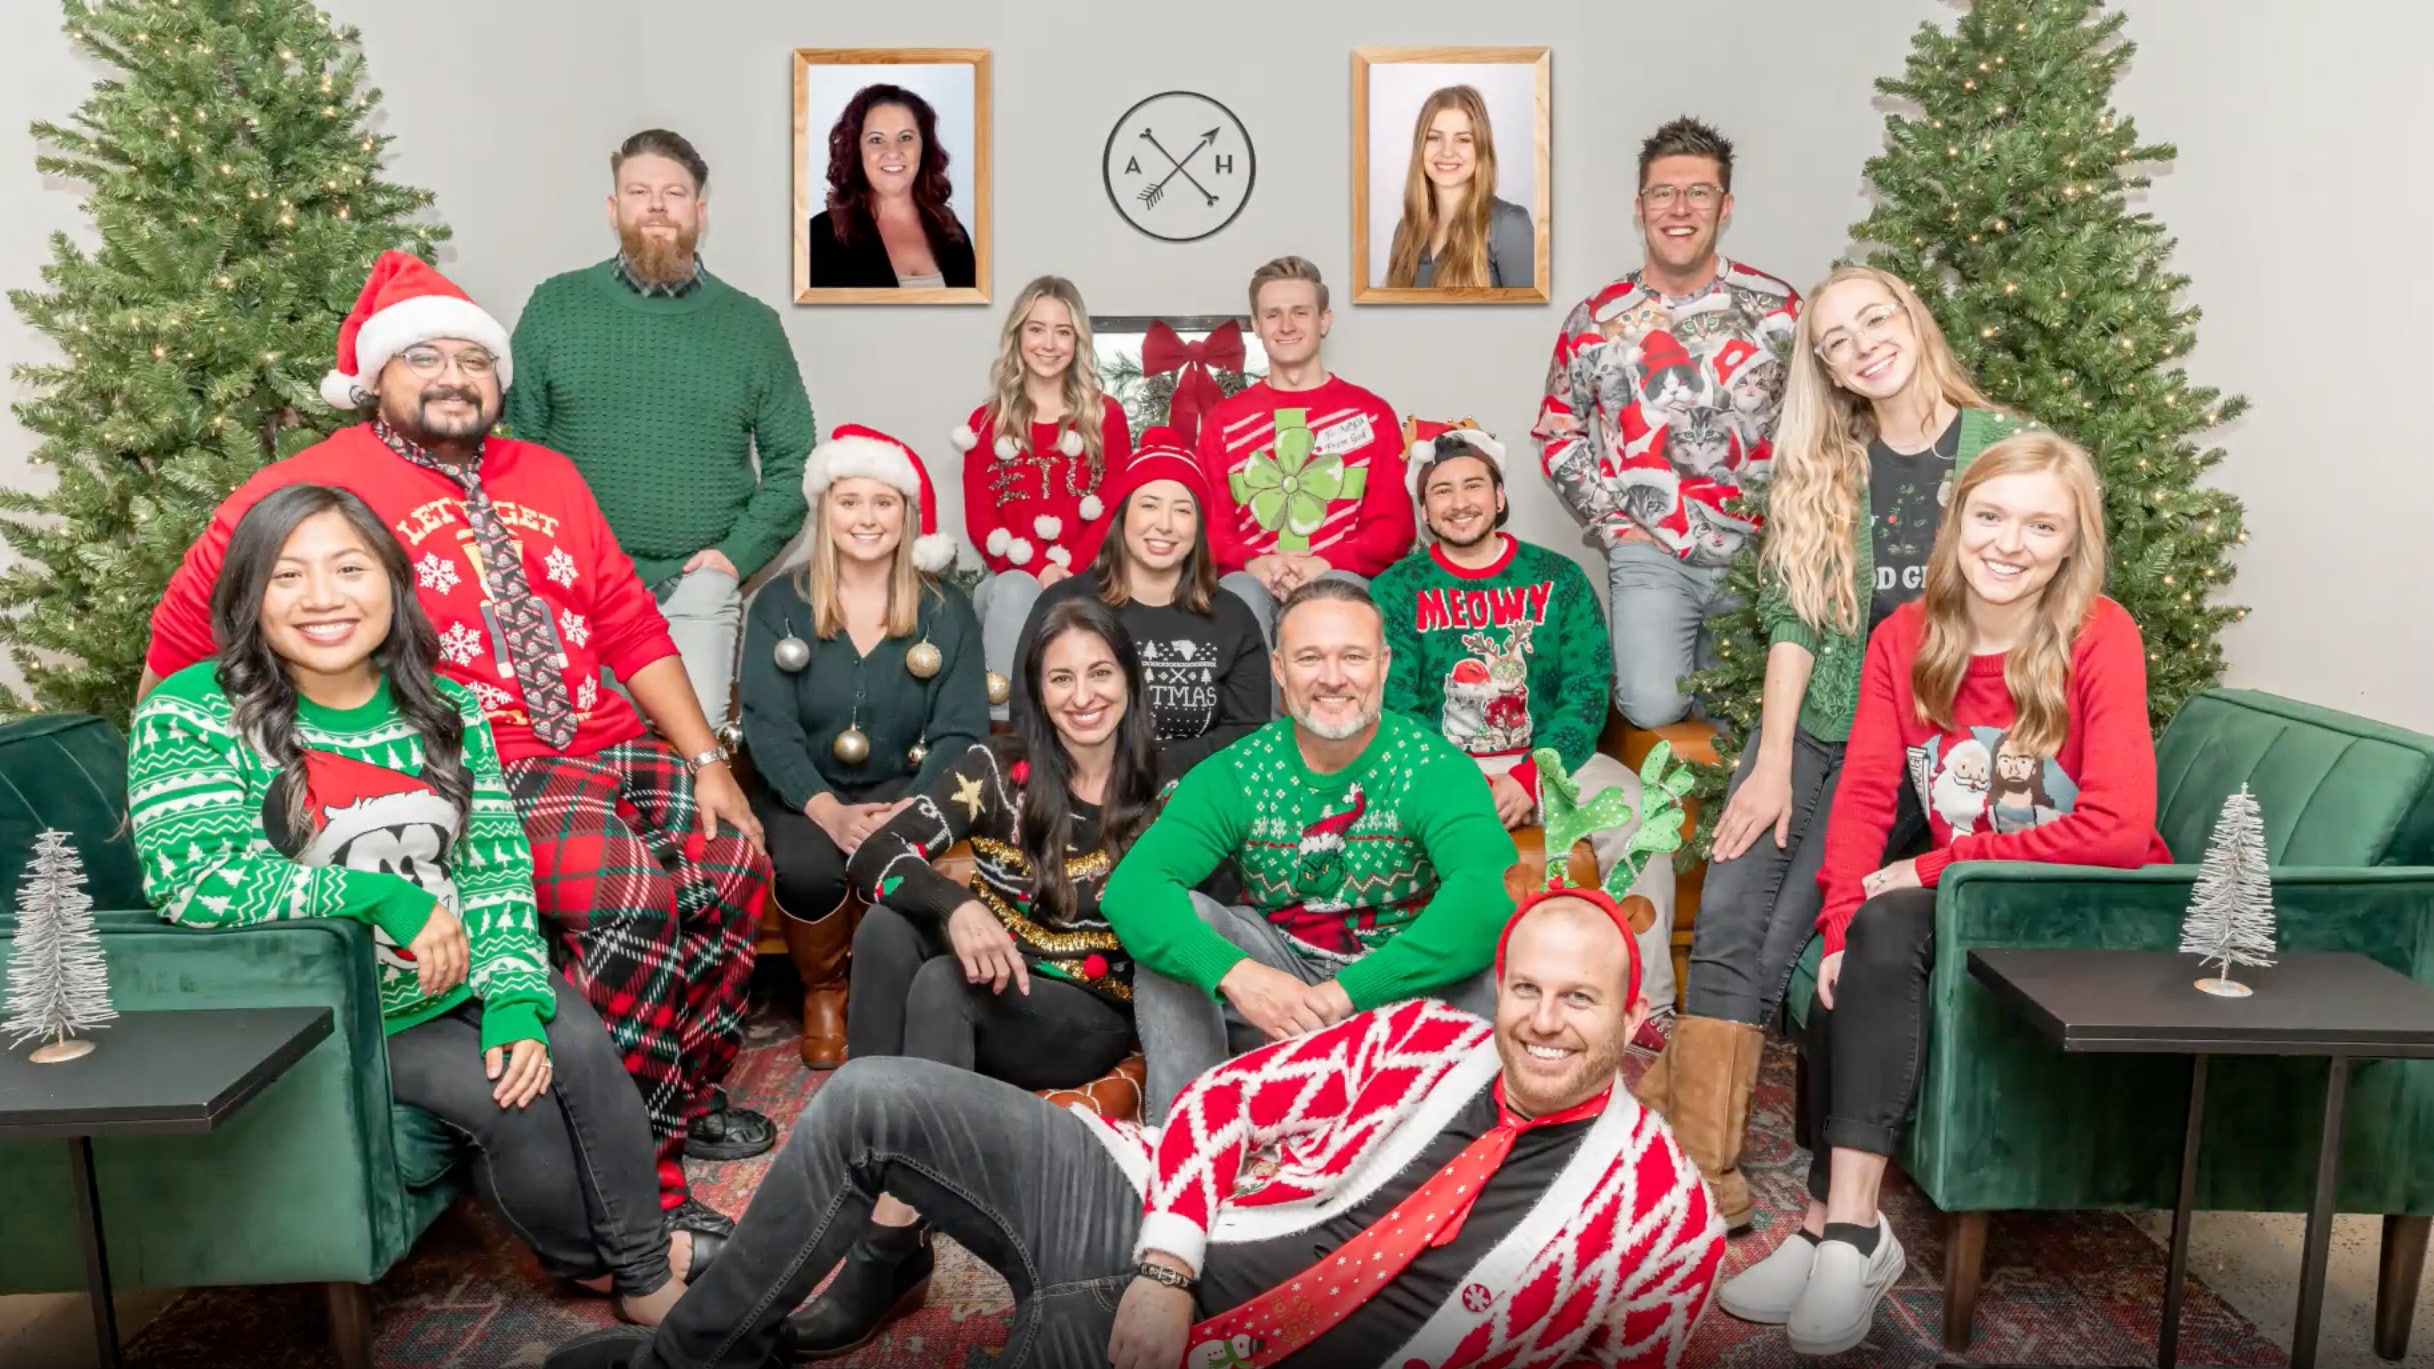 A 2021 Christmas card photo with the staff of Archer & Hound dressed up in green, red, and Christmas attire, with two christmas trees and two photos of staff members who couldn't attend the photo shoot